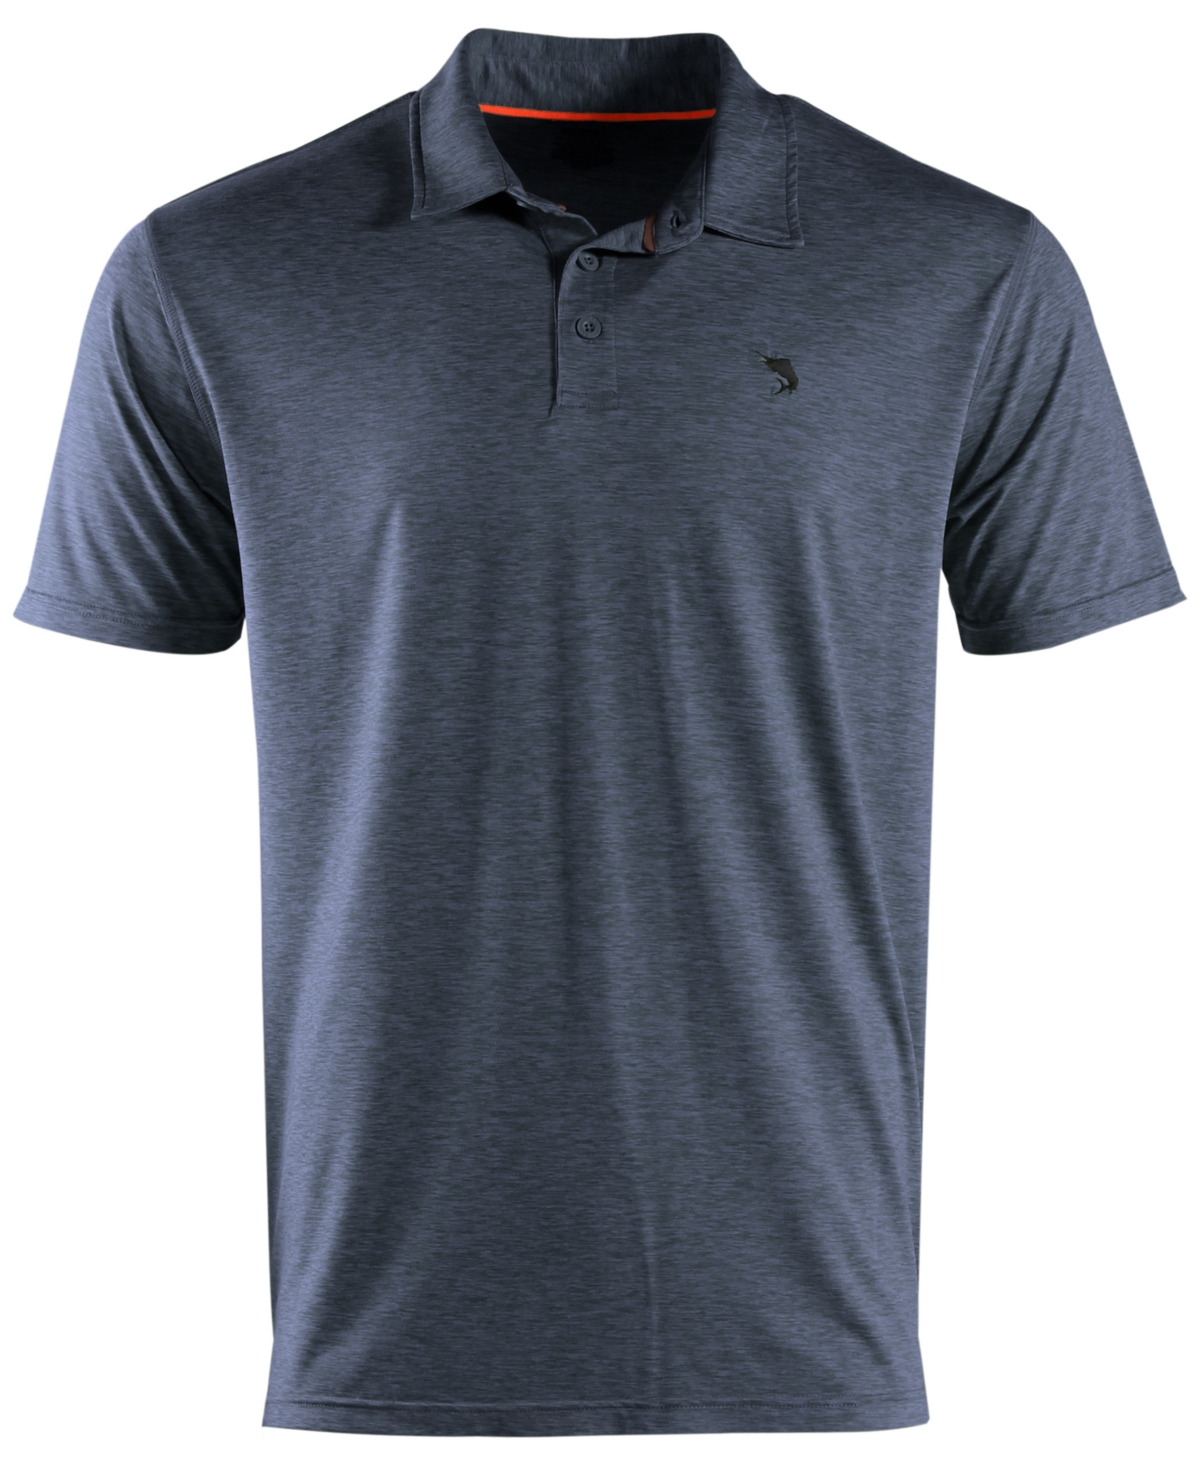 Salt Life Men's  Outrigger Performance Polo Shirt In Navy Heather